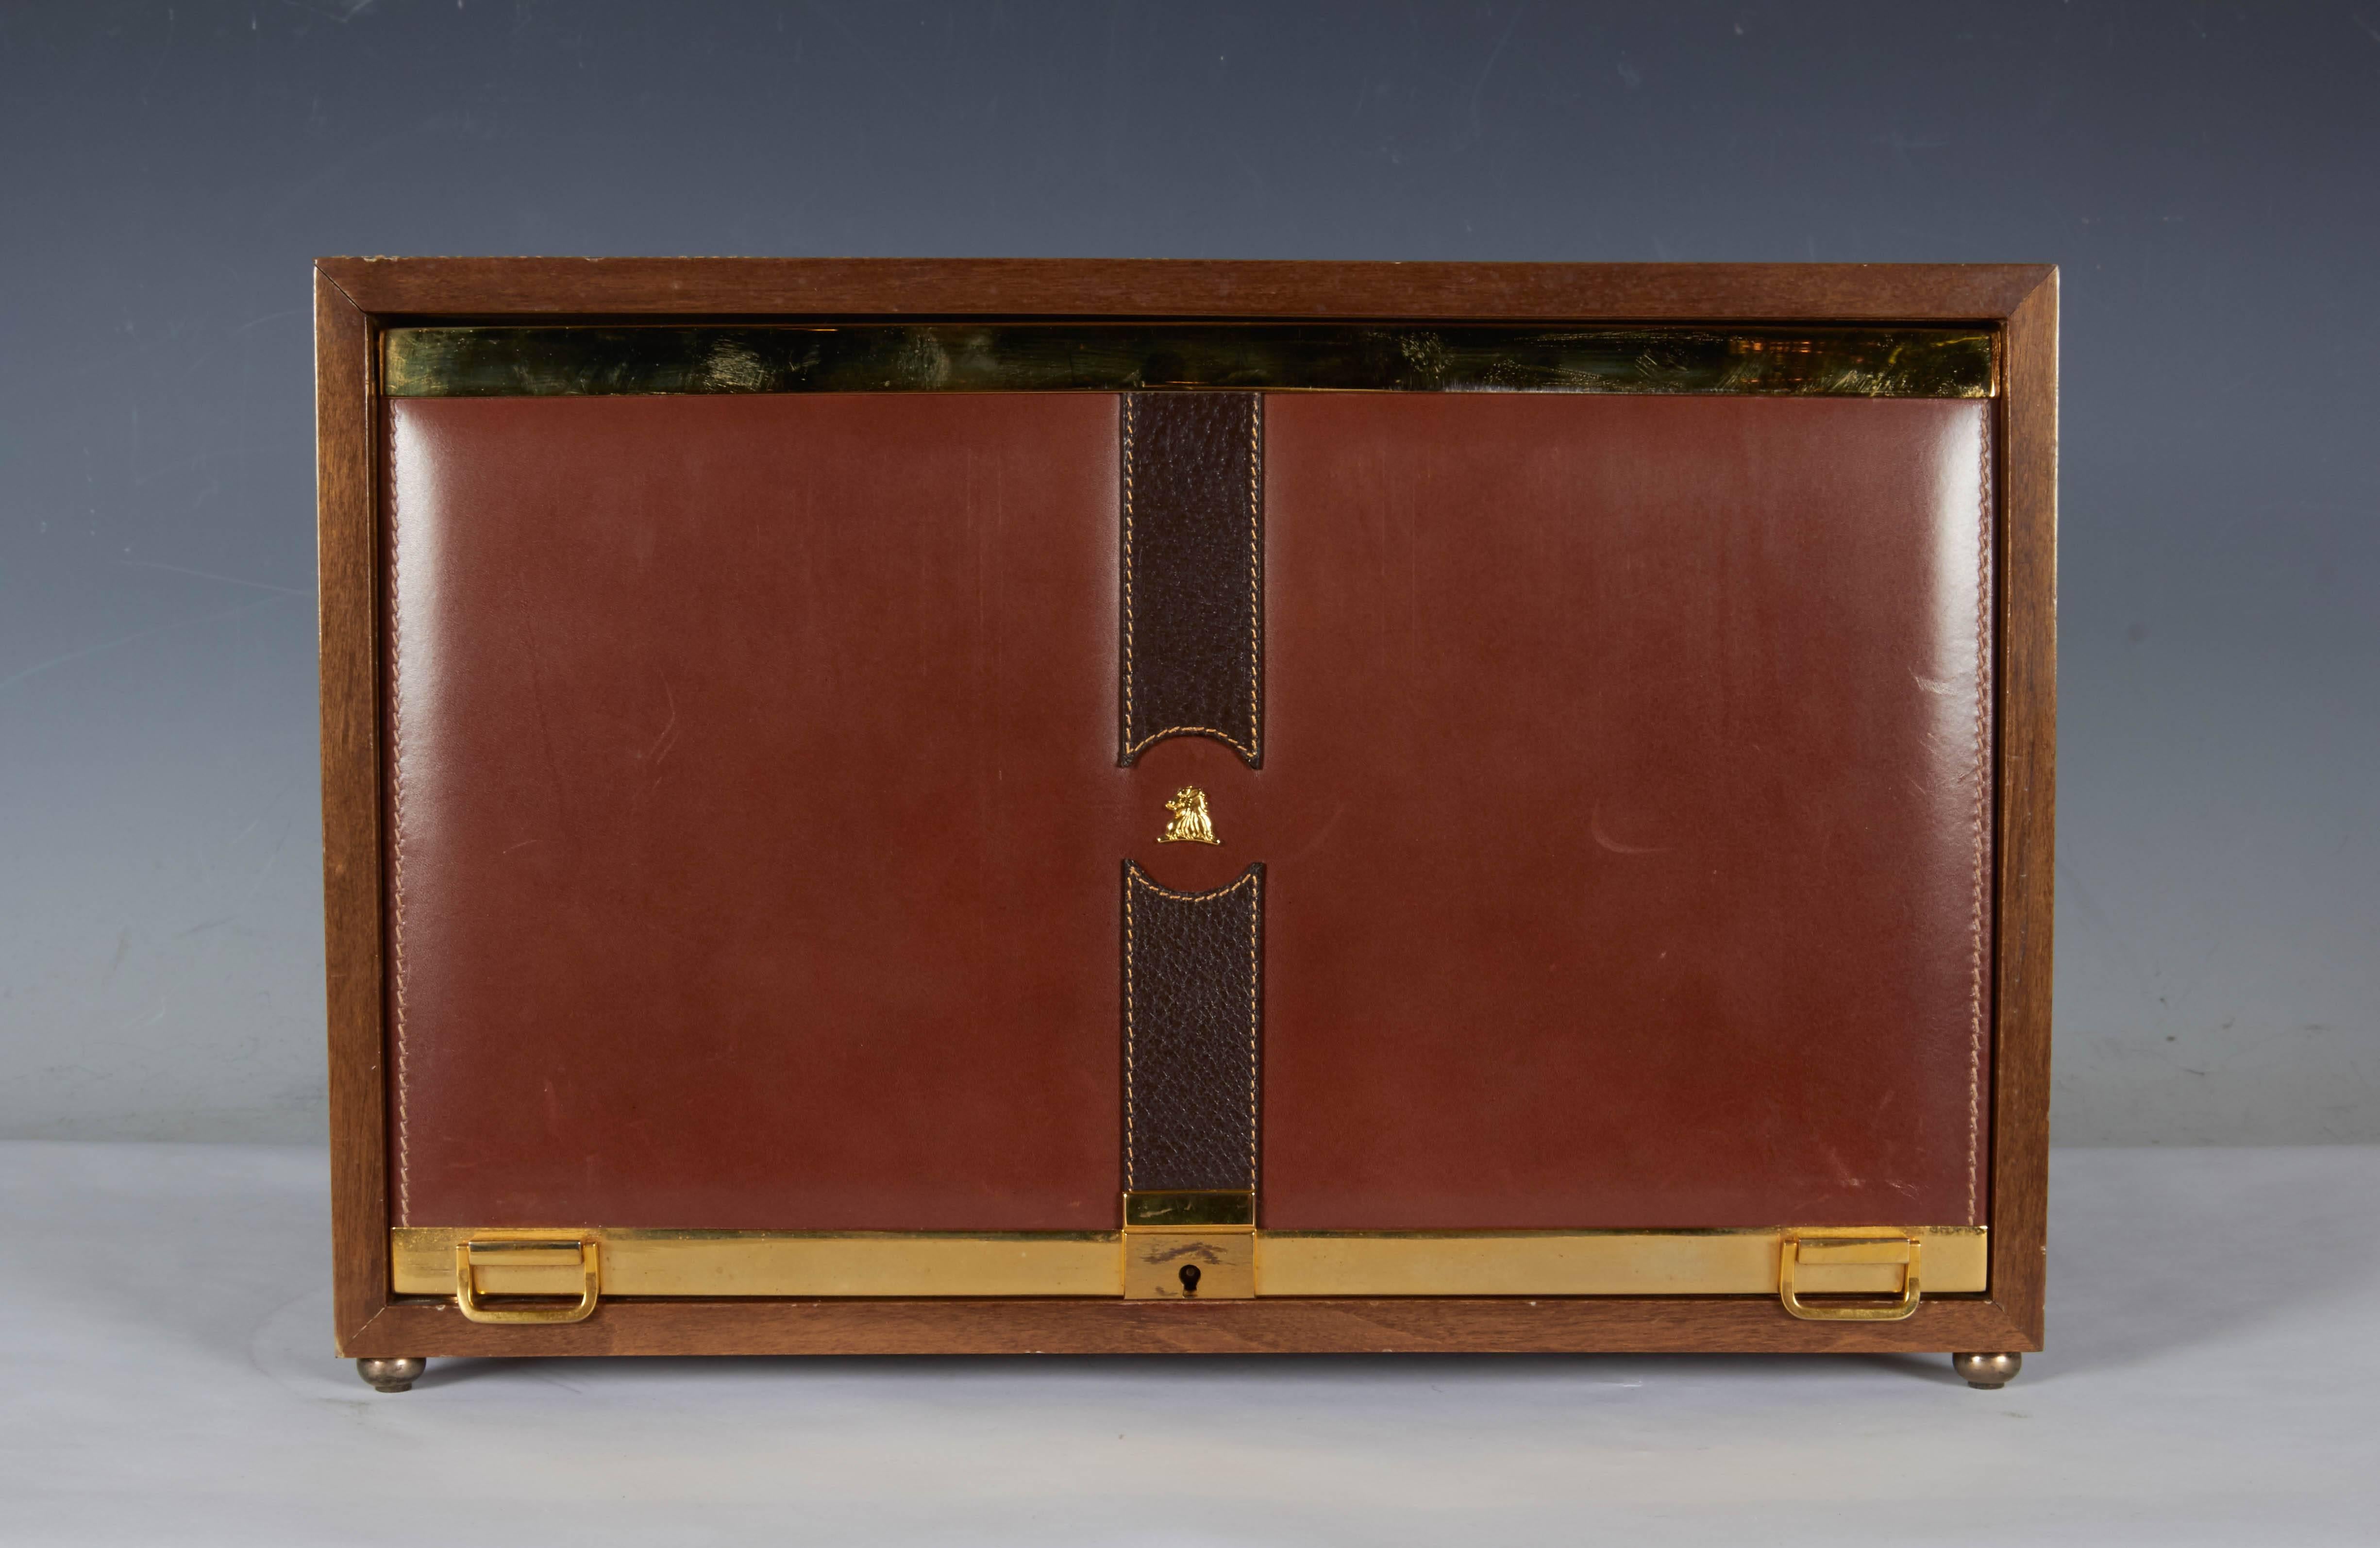 This circa 1980s Italian men's jewelry box by Mark Cross, comes in leather, in Dual tones and textures of warm and dark brown against a wooden frame, brass hardware and handles to the front and sides, on ball feet; included is a locking panel, which